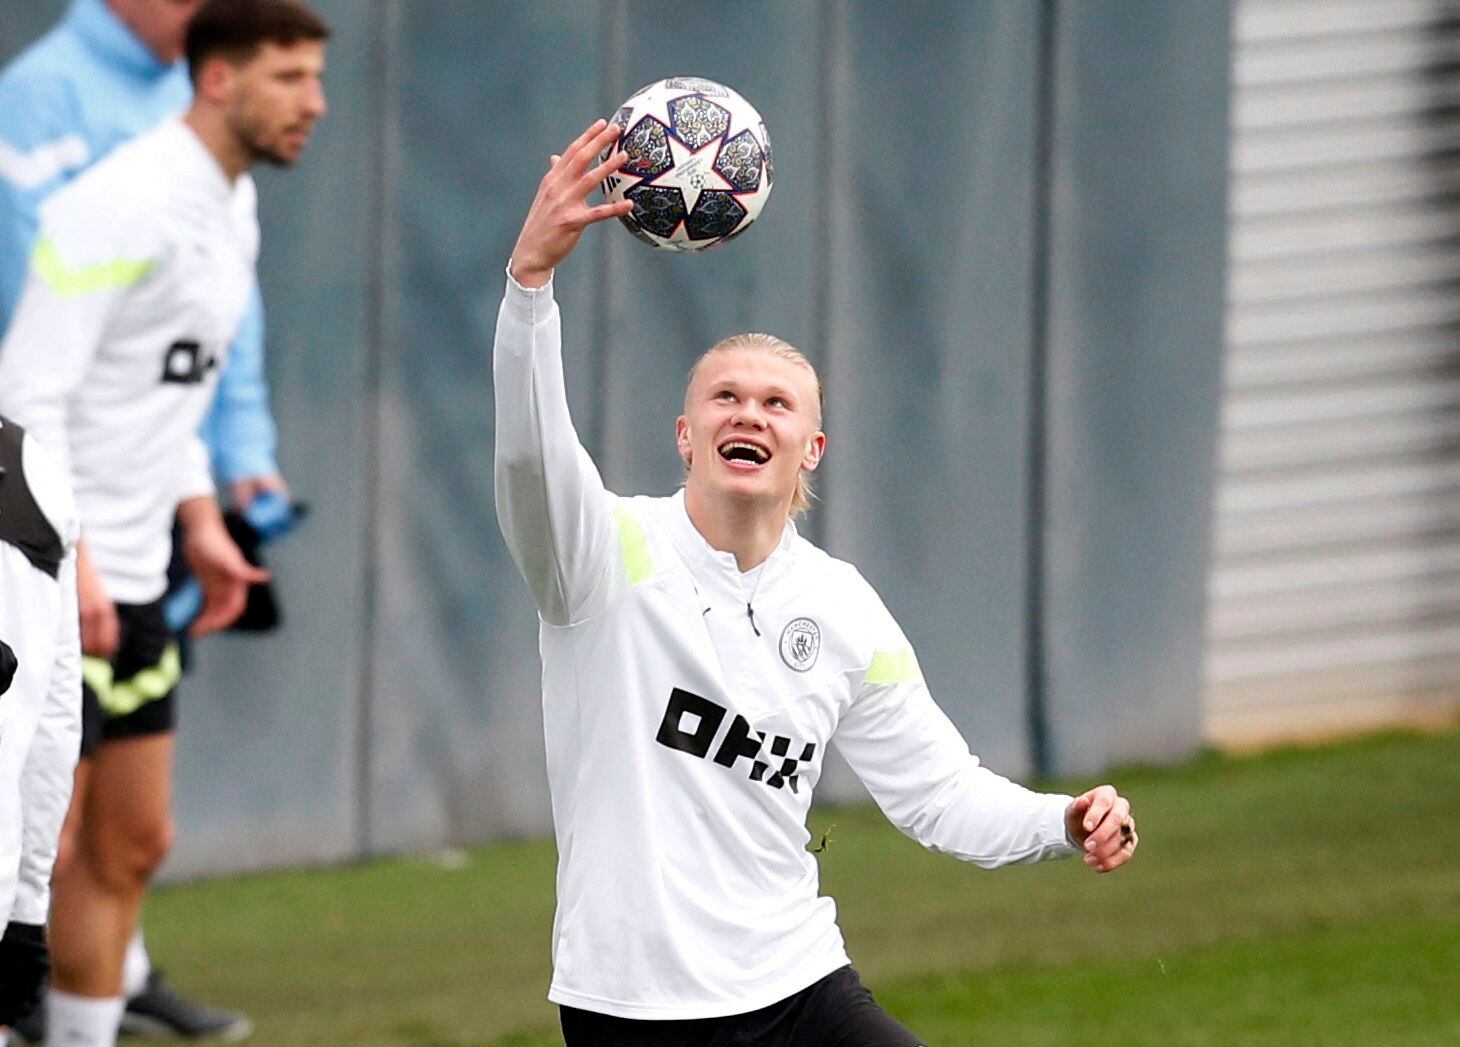 Soccer Football - Champions League - Manchester City Training - Etihad Campus, Manchester, Britain - February 21, 2023 Manchester City's Erling Braut Haaland during training Action Images via Reuters/Ed Sykes